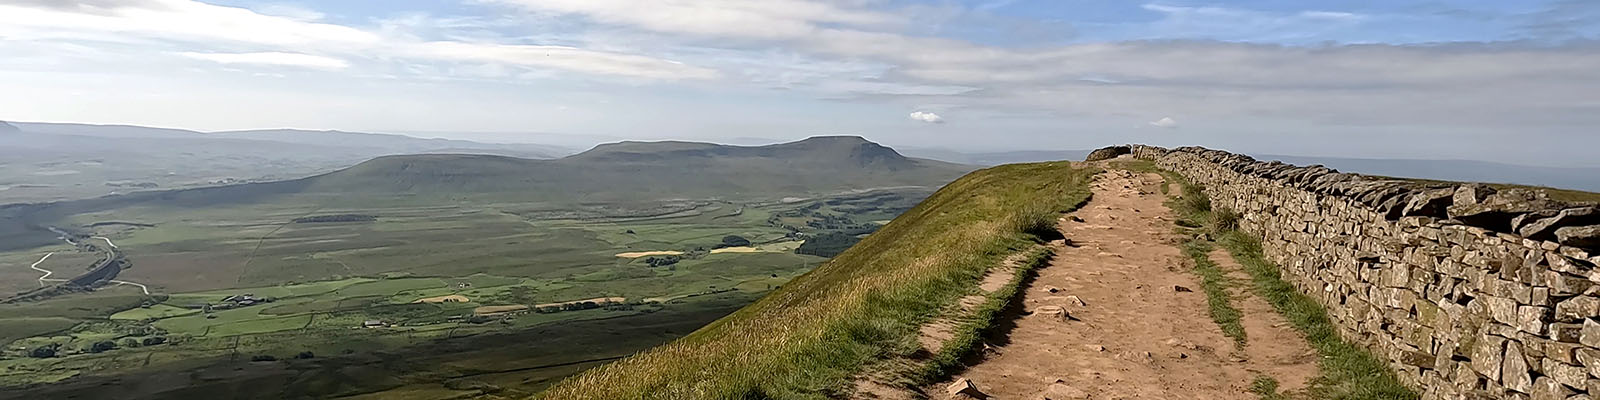 Ingleborough and the Ribblehead Viaduct from the summit of Whernside